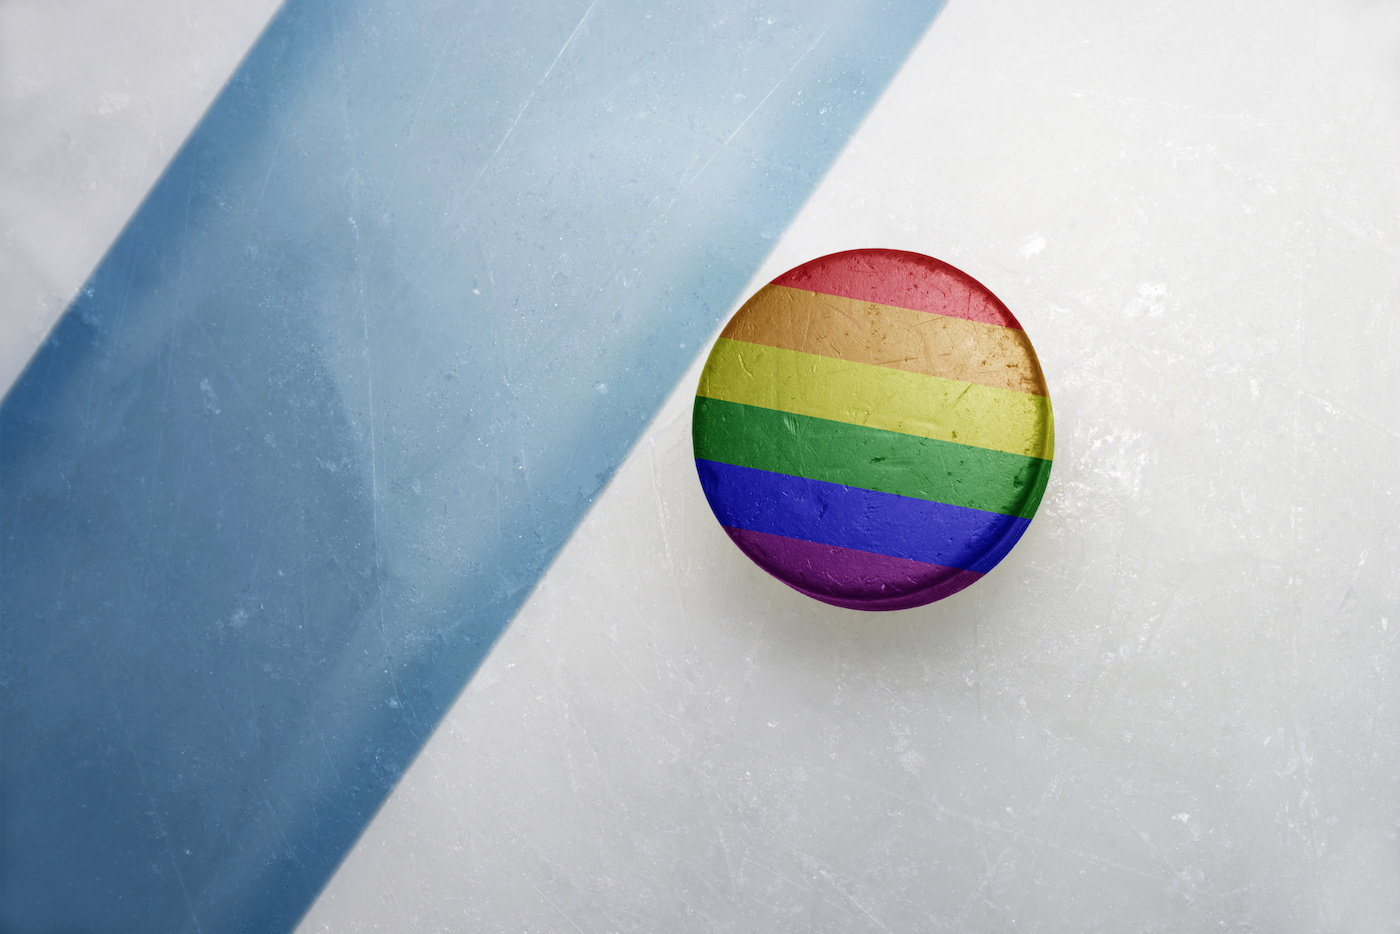 NHL Pride Night: Controversy continues as more players refuse to